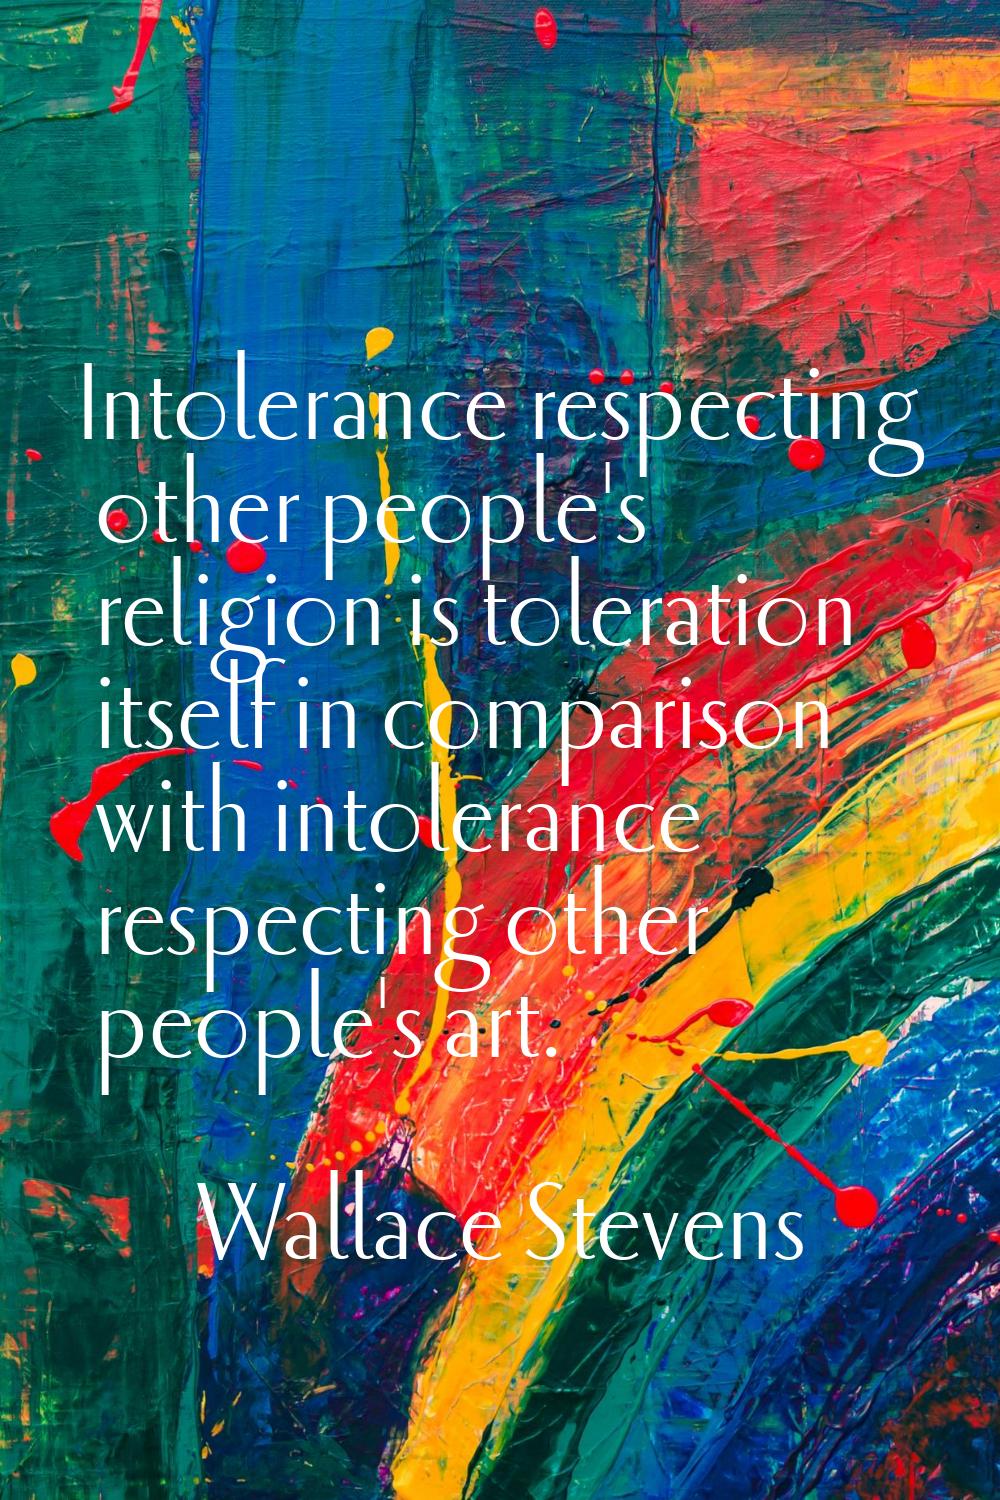 Intolerance respecting other people's religion is toleration itself in comparison with intolerance 